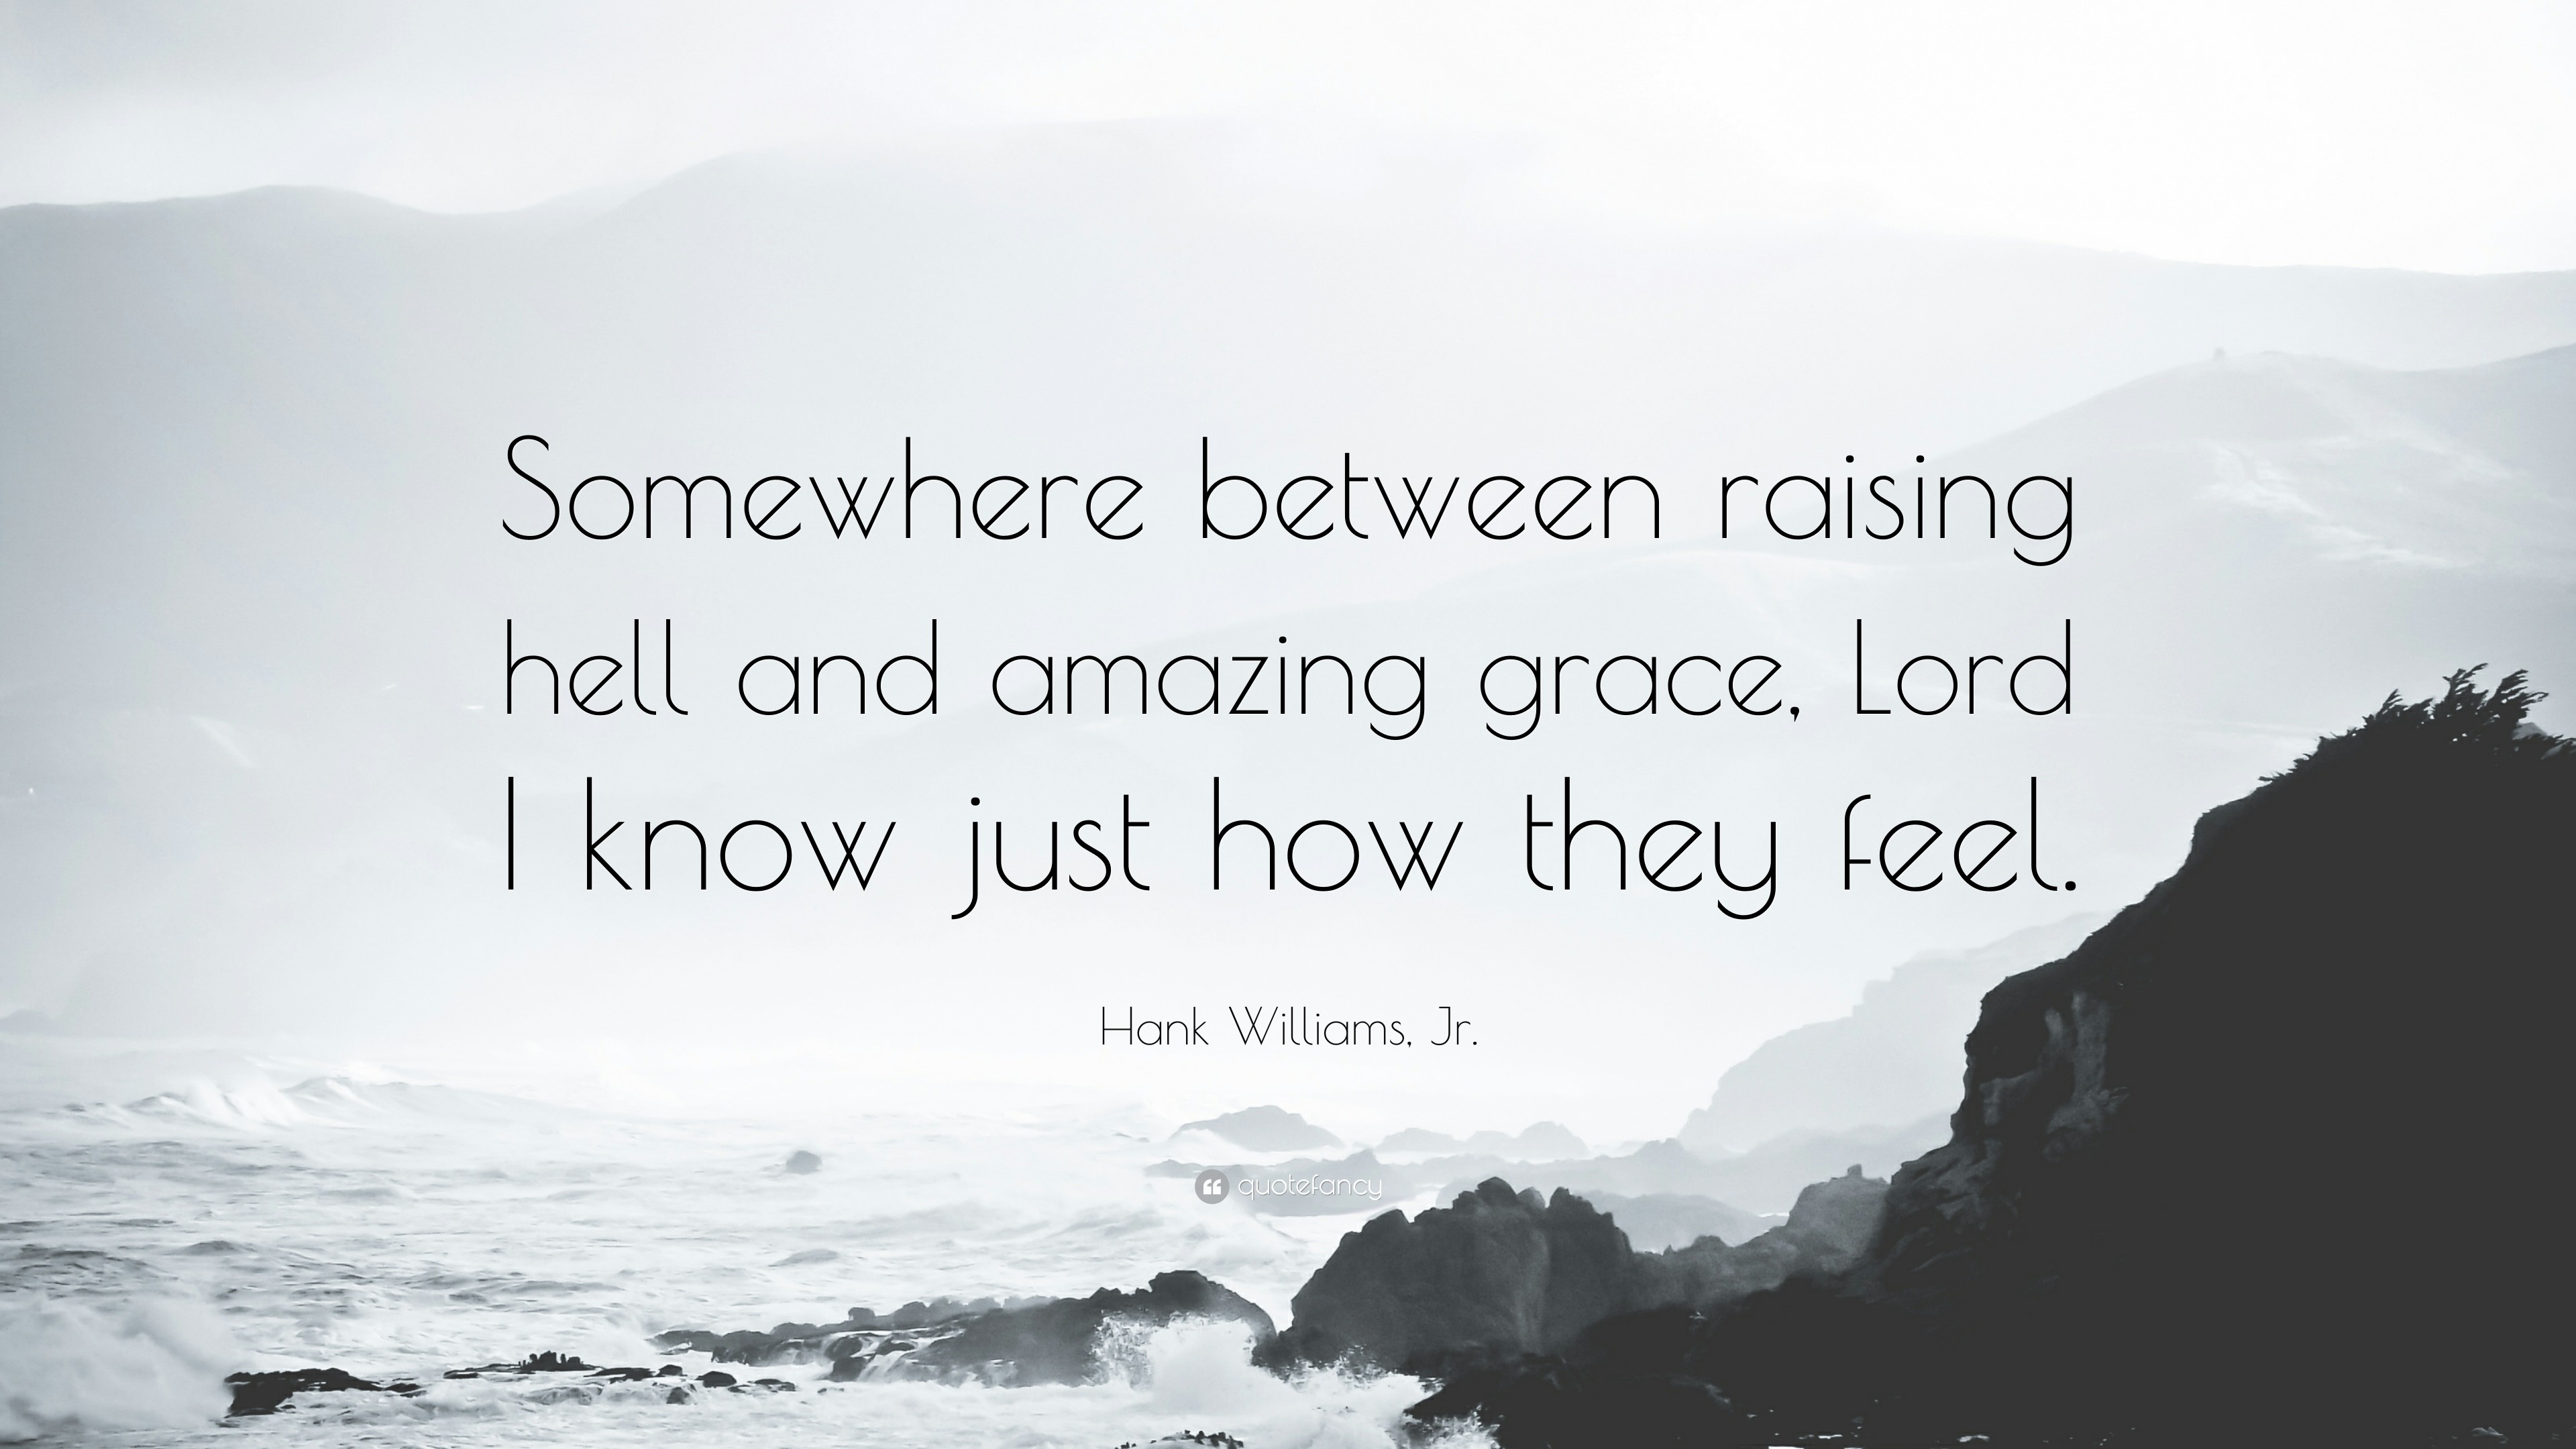 3840x2160 Hank Williams, Jr. Quote: “Somewhere between raising hell and amazing grace,